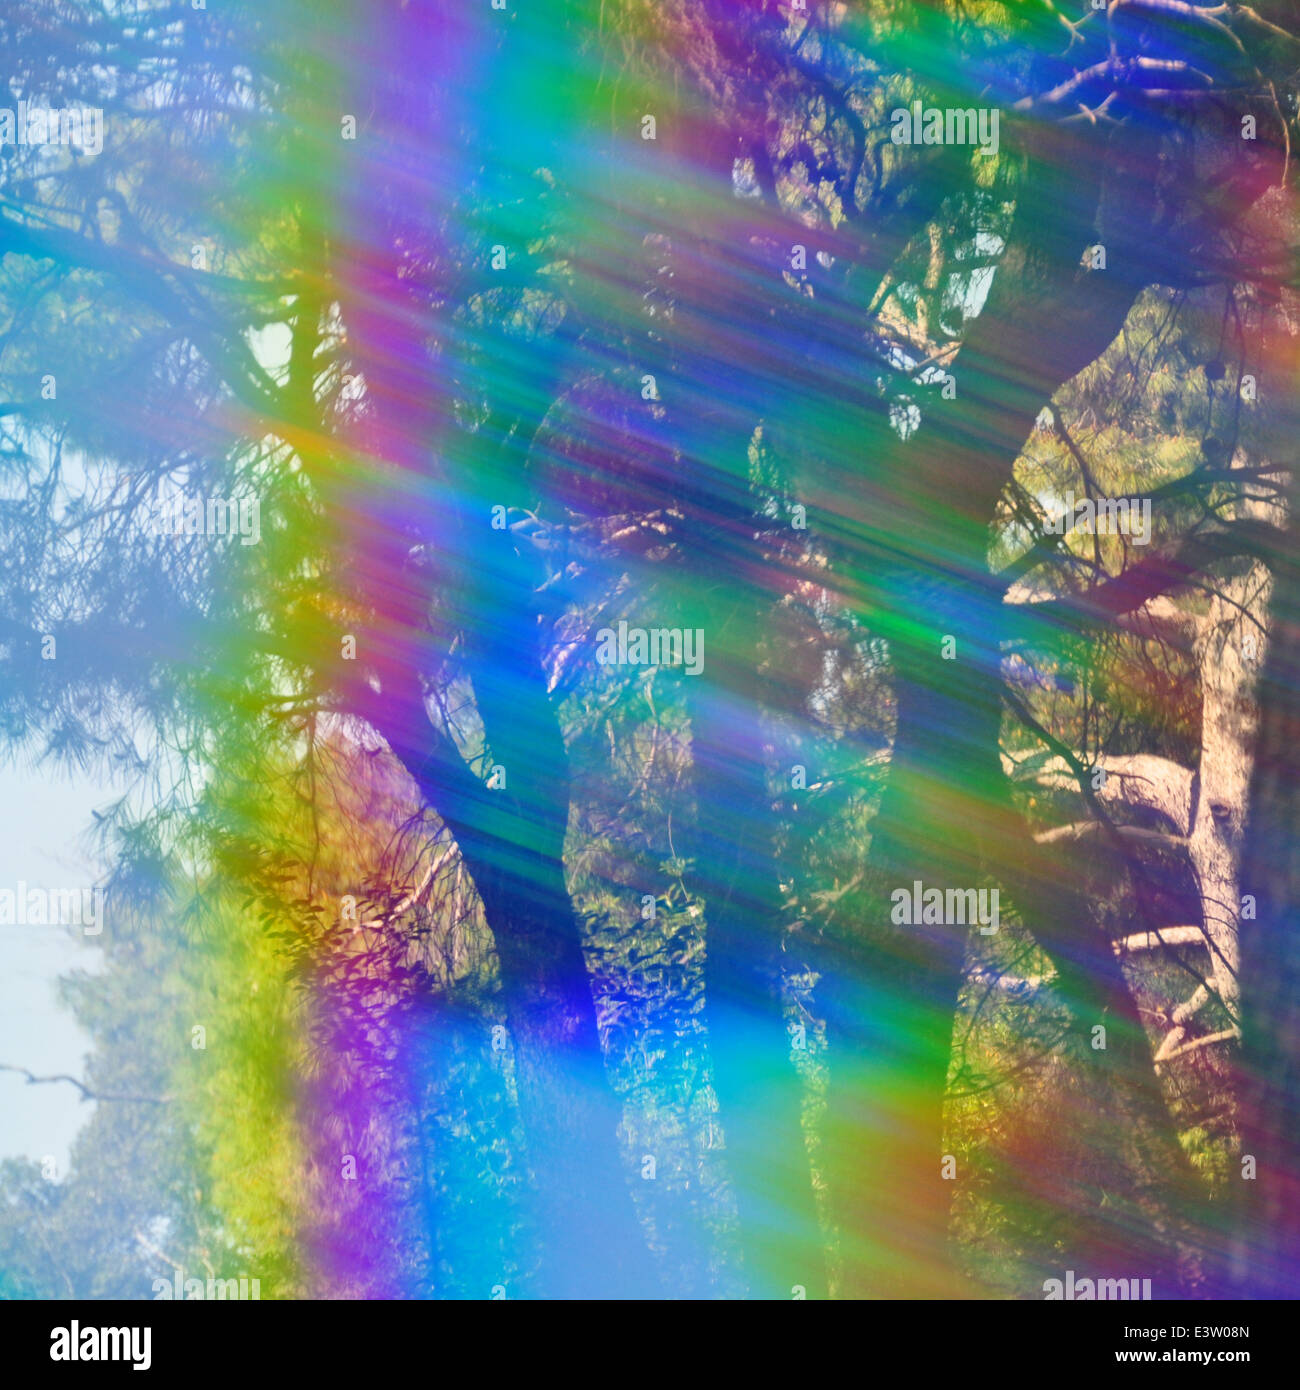 Spectrum colors light leak and faded trees abstract forest reflections through vintage prism filter. Stock Photo